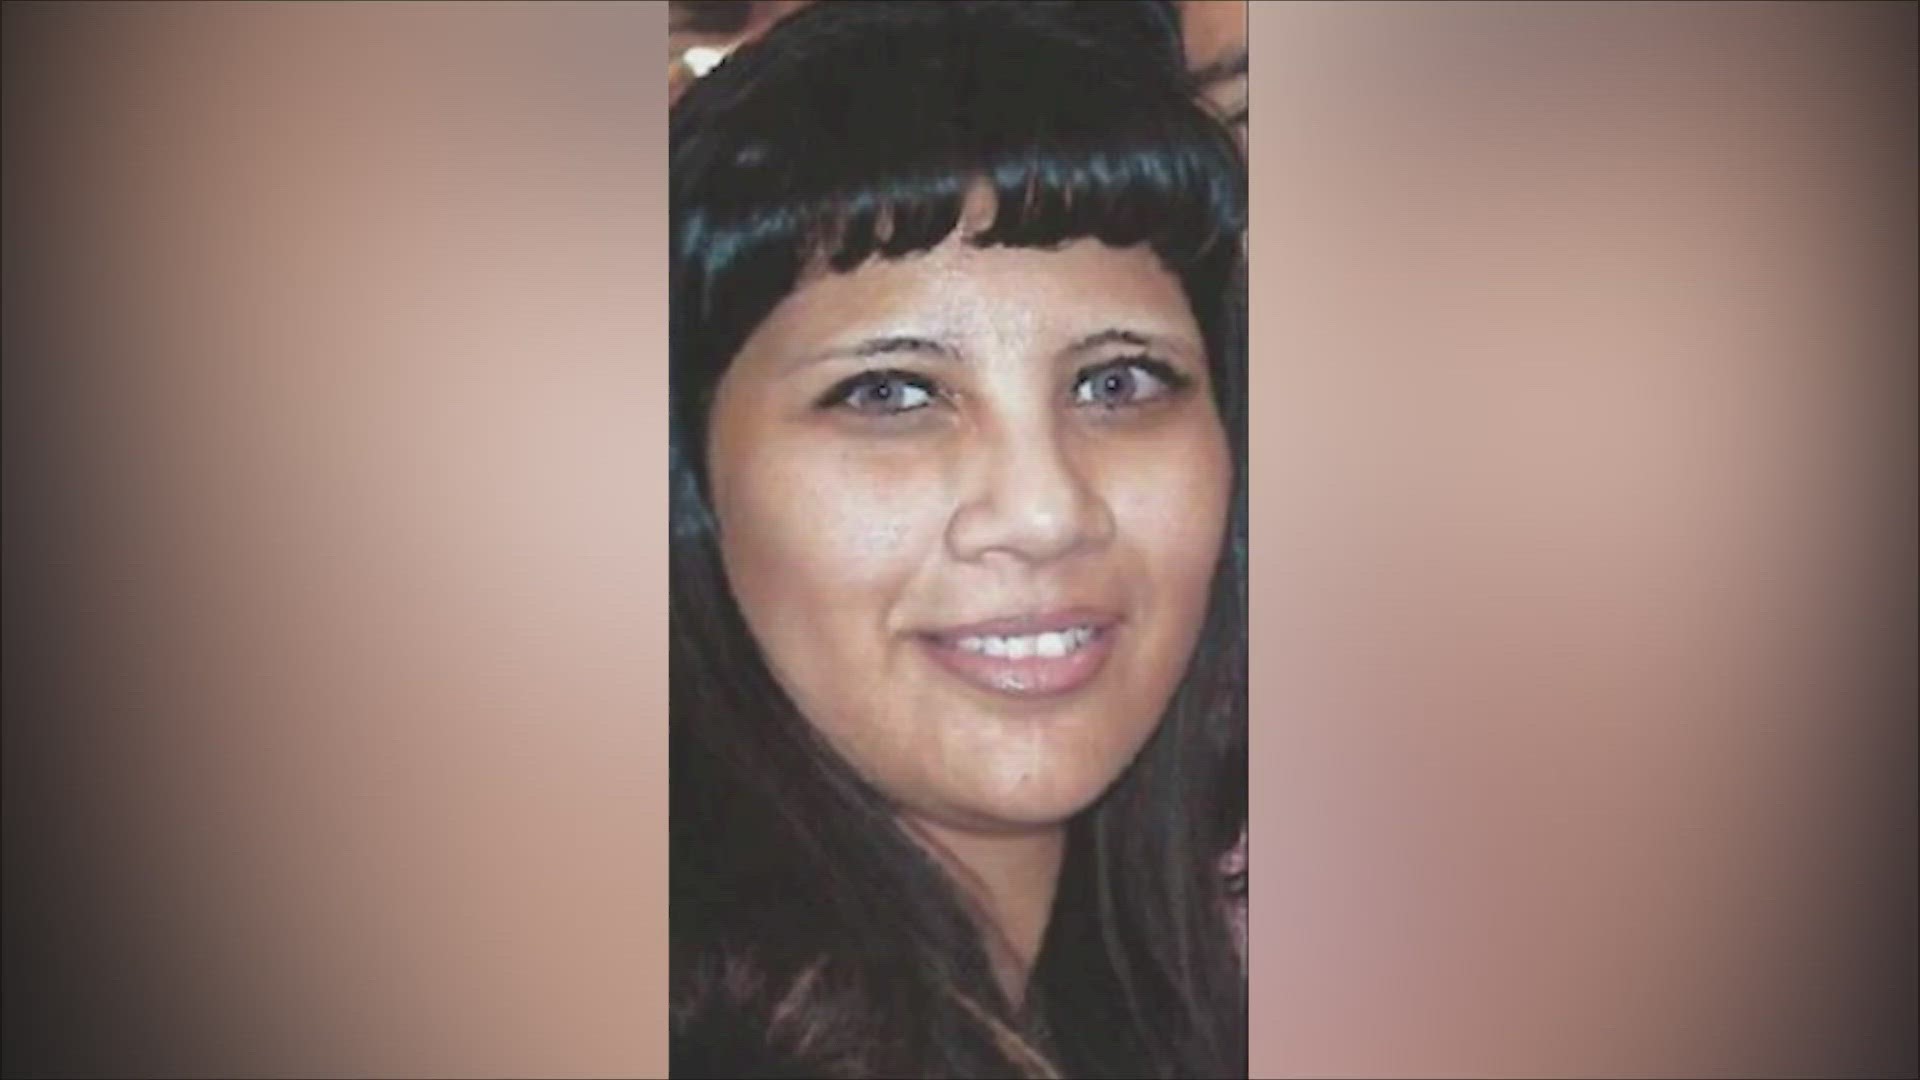 Carmen Mares was last seen on the 2000 block of Zarzamora in September of 2007. Her daughter just wants to know what happened.